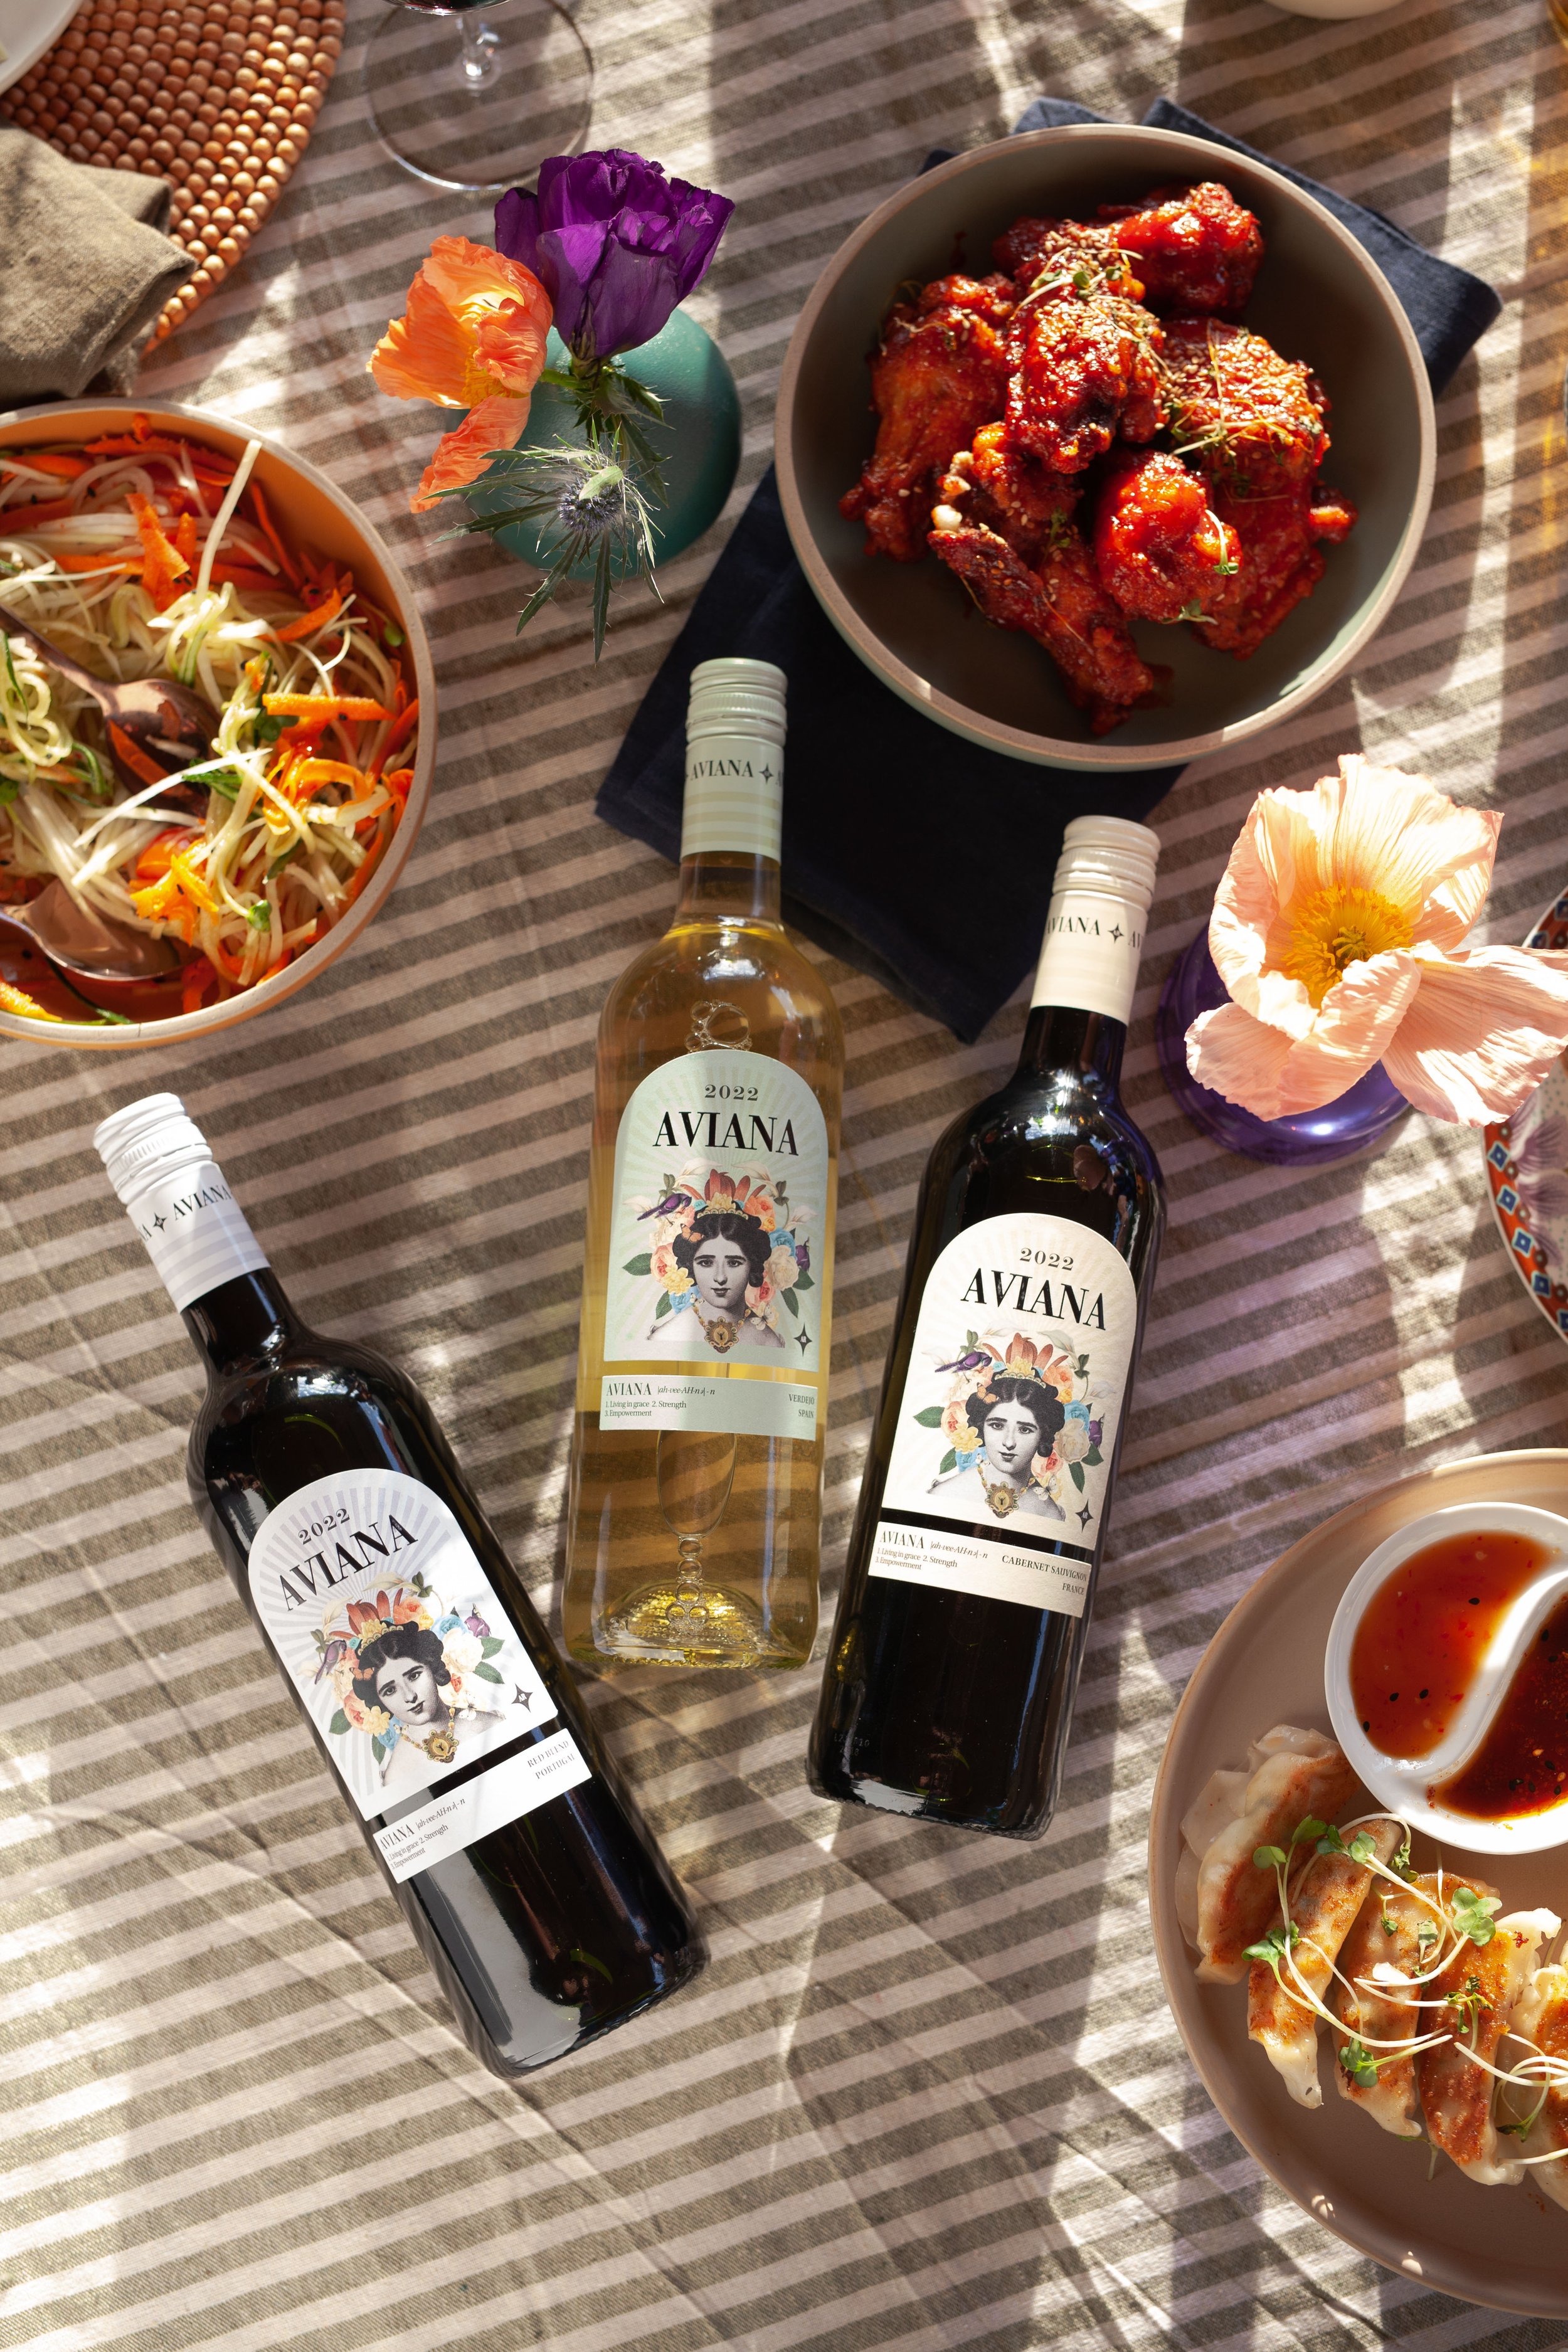 Aviana wine collection and picnic food